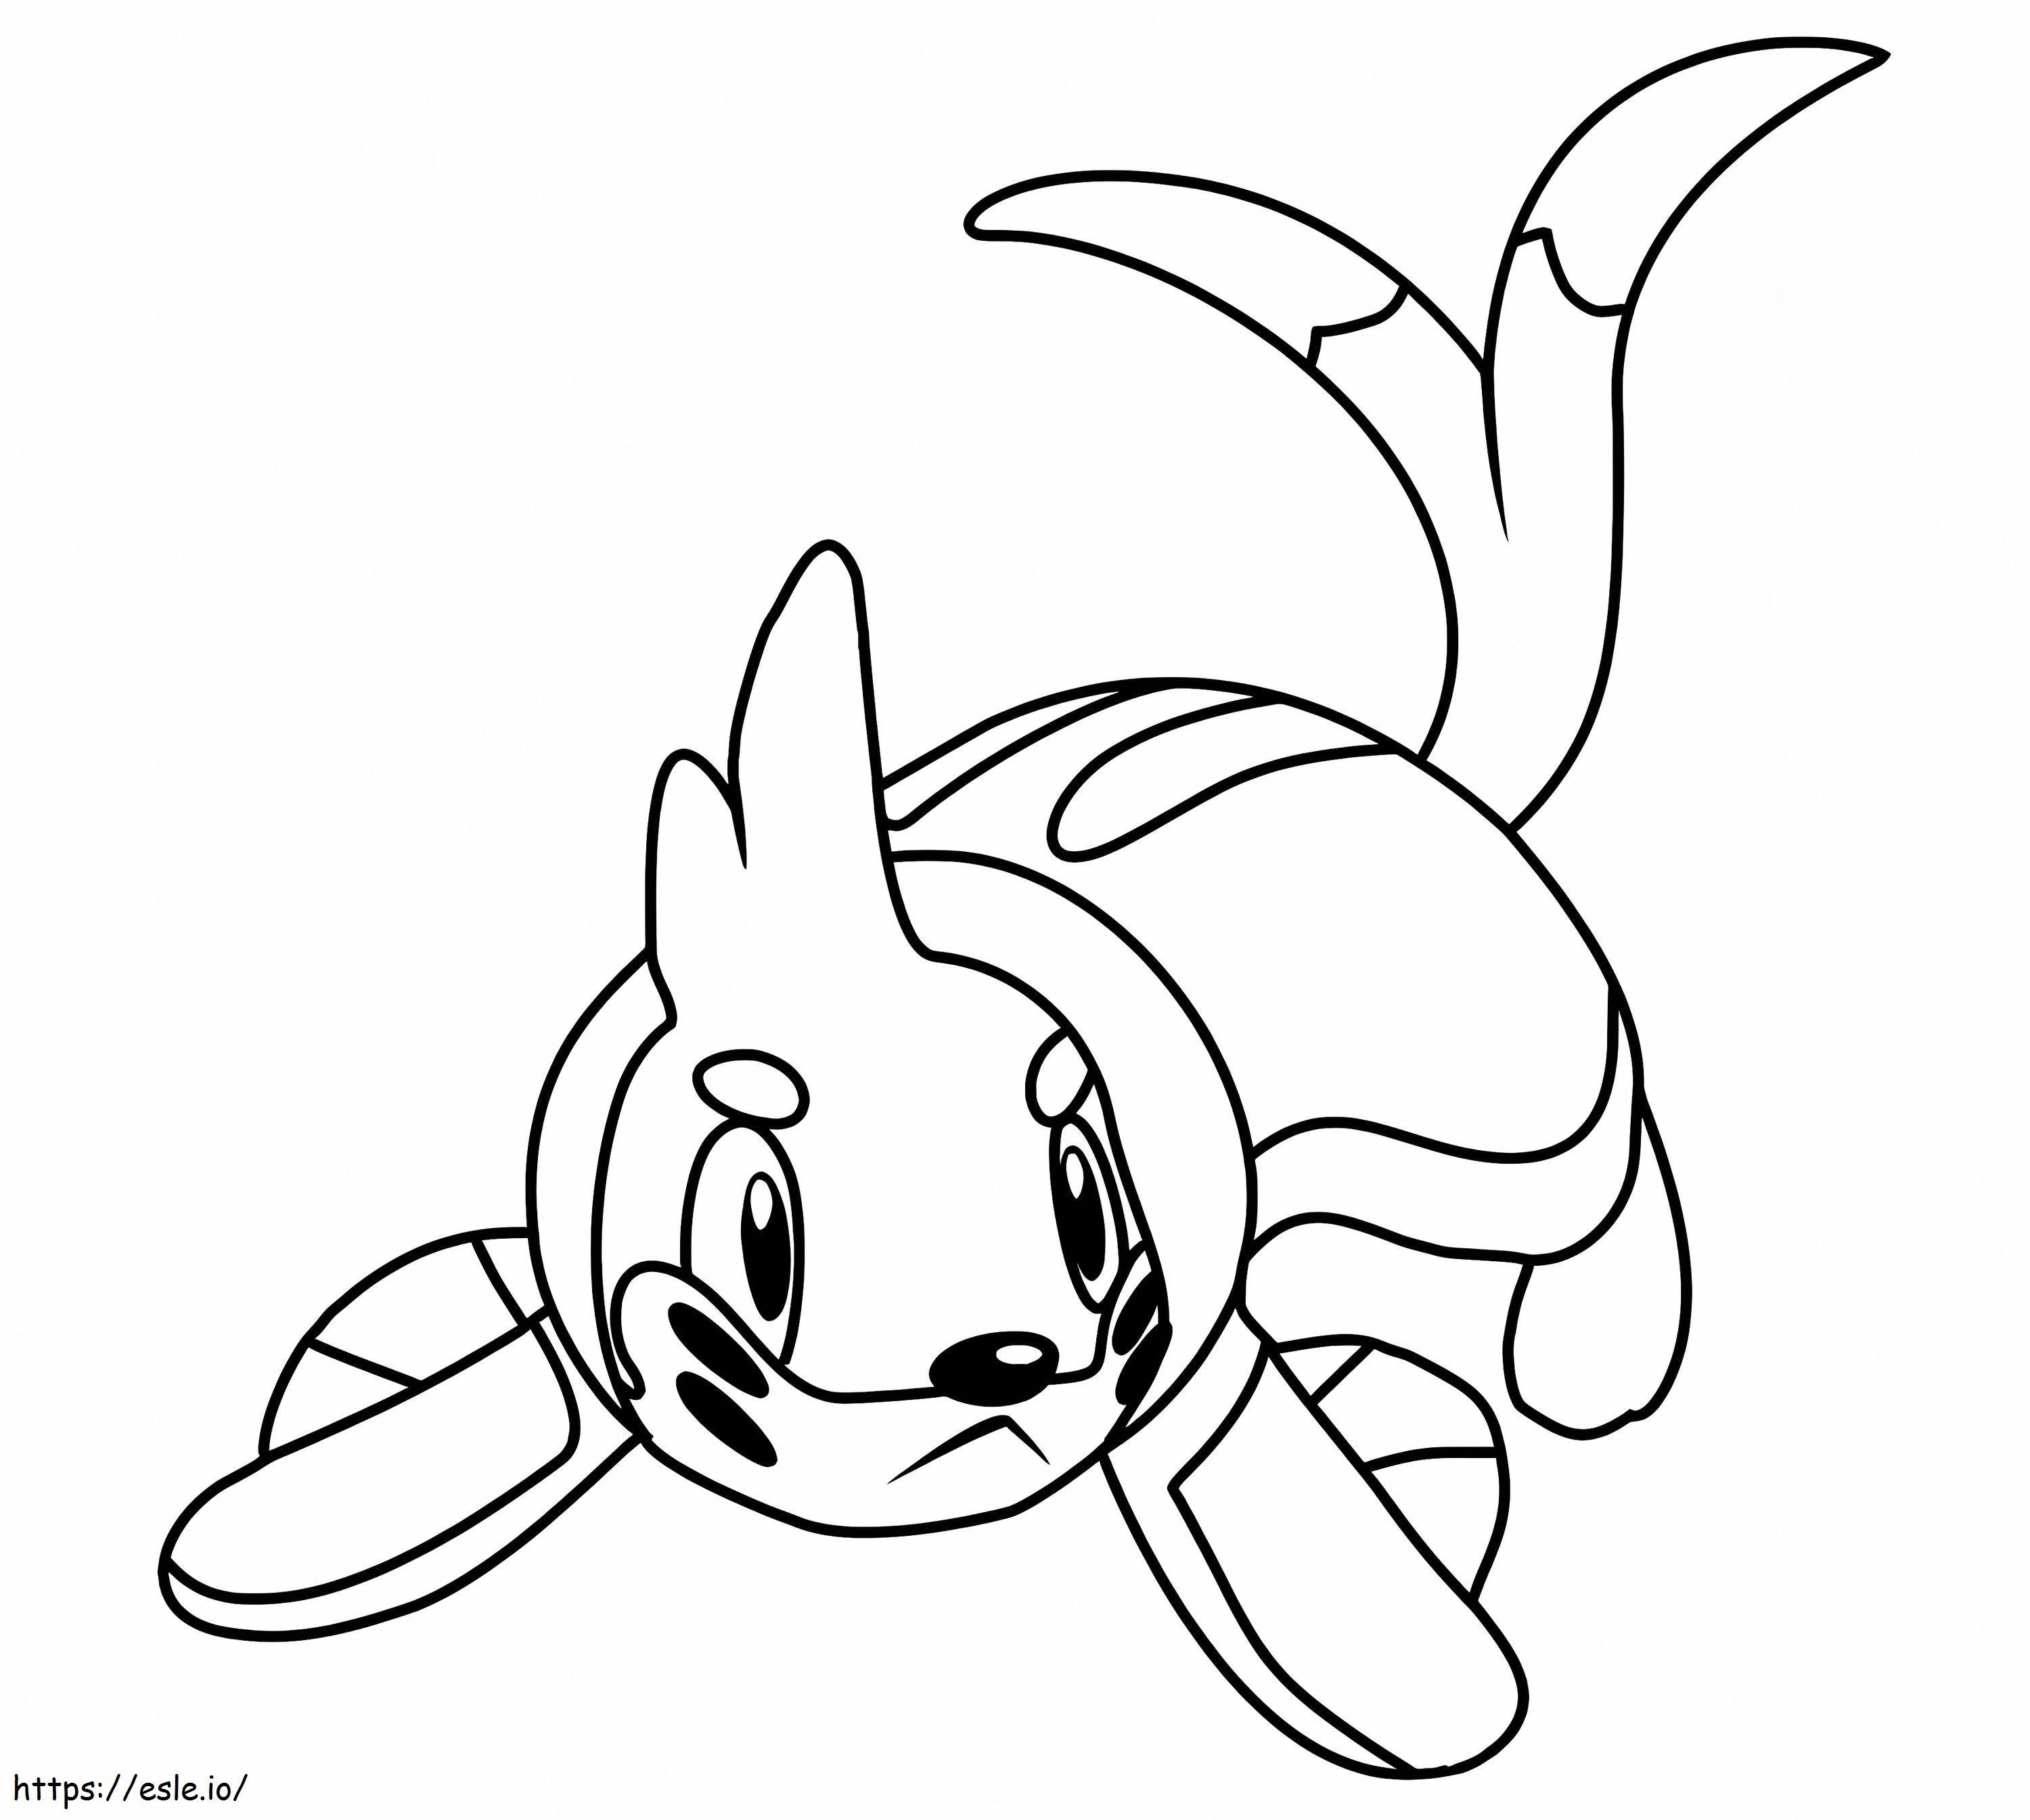 Buizel Pokemon coloring page